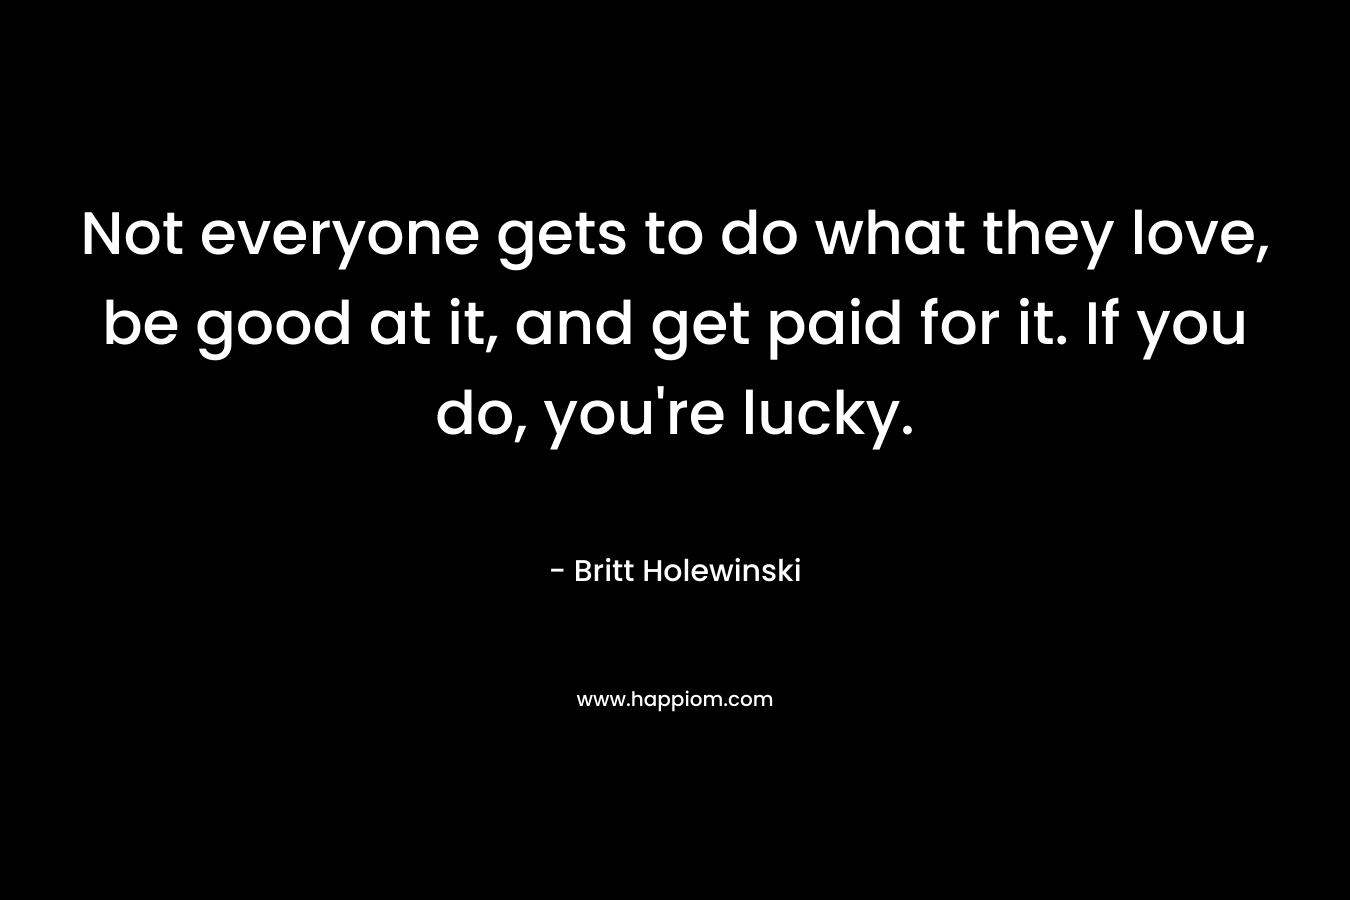 Not everyone gets to do what they love, be good at it, and get paid for it. If you do, you're lucky.